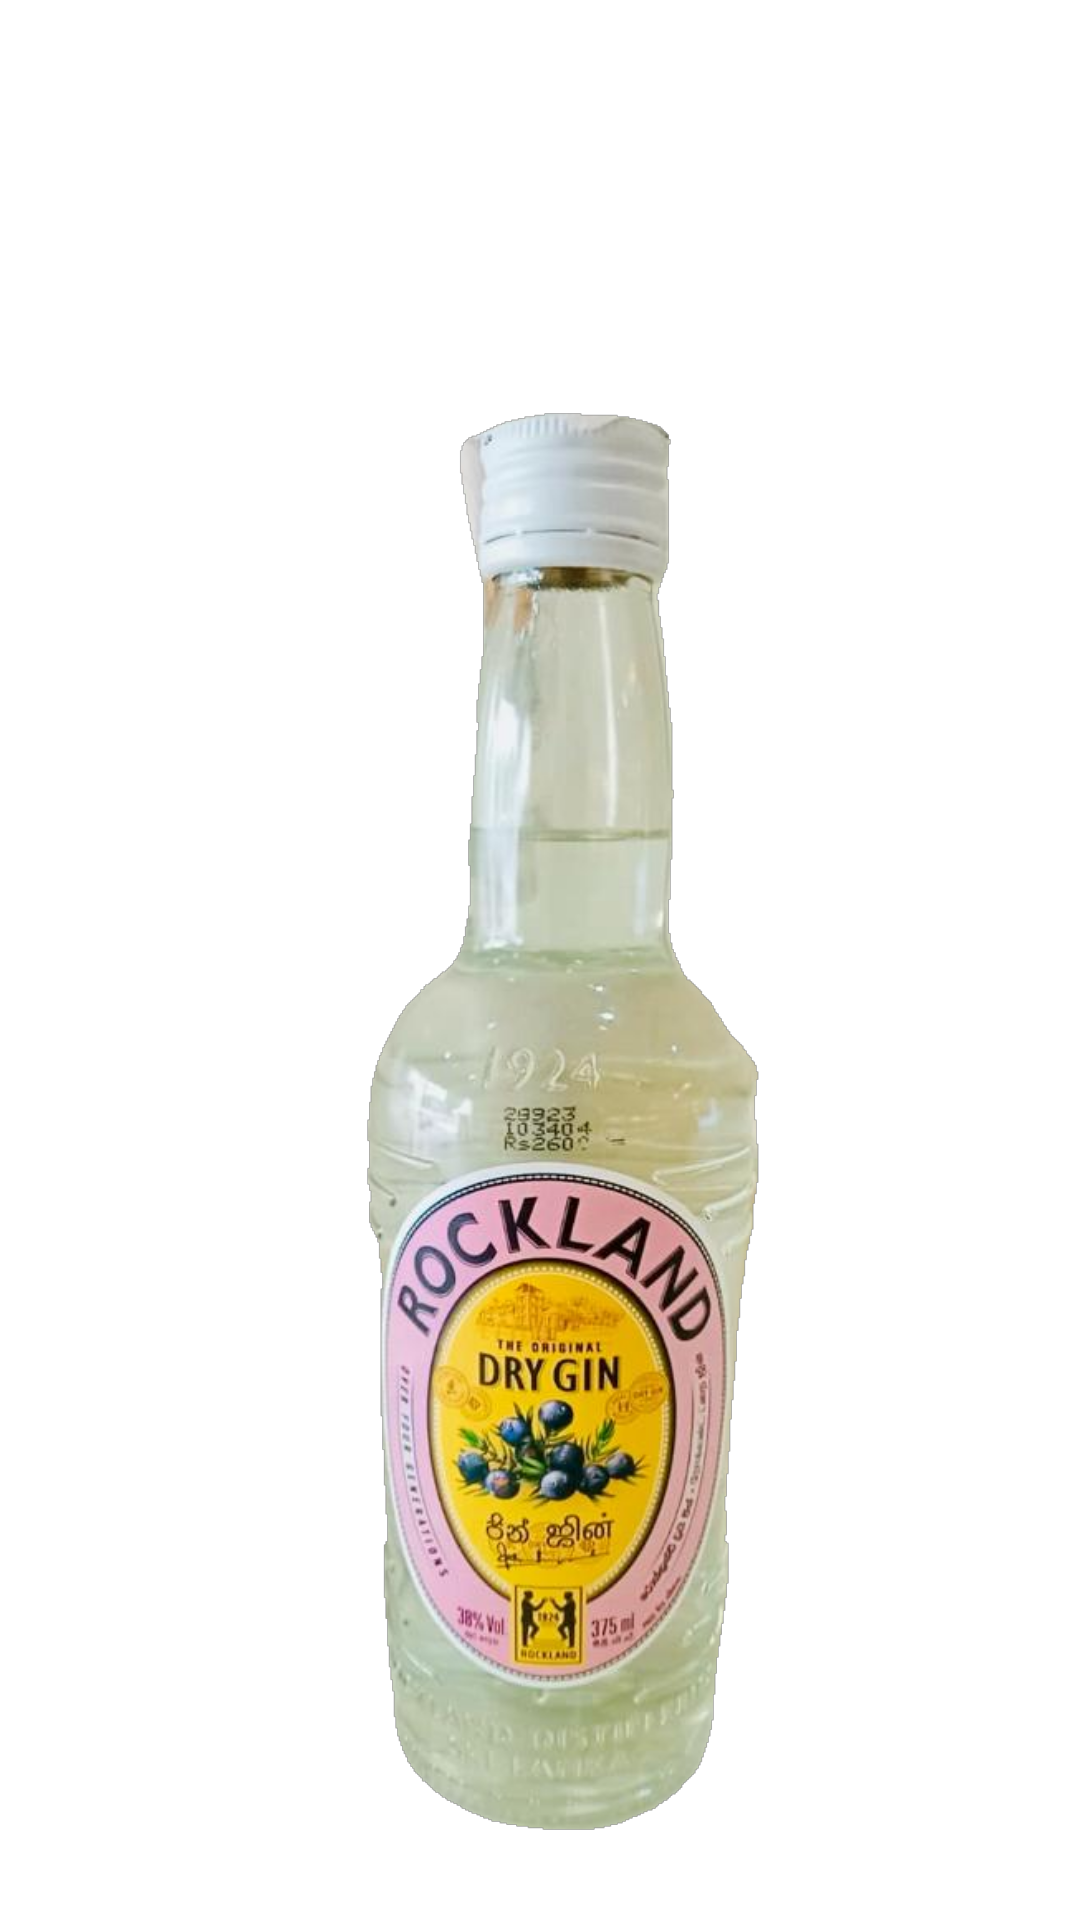 ROCKLAND DRY GIN 375 ML